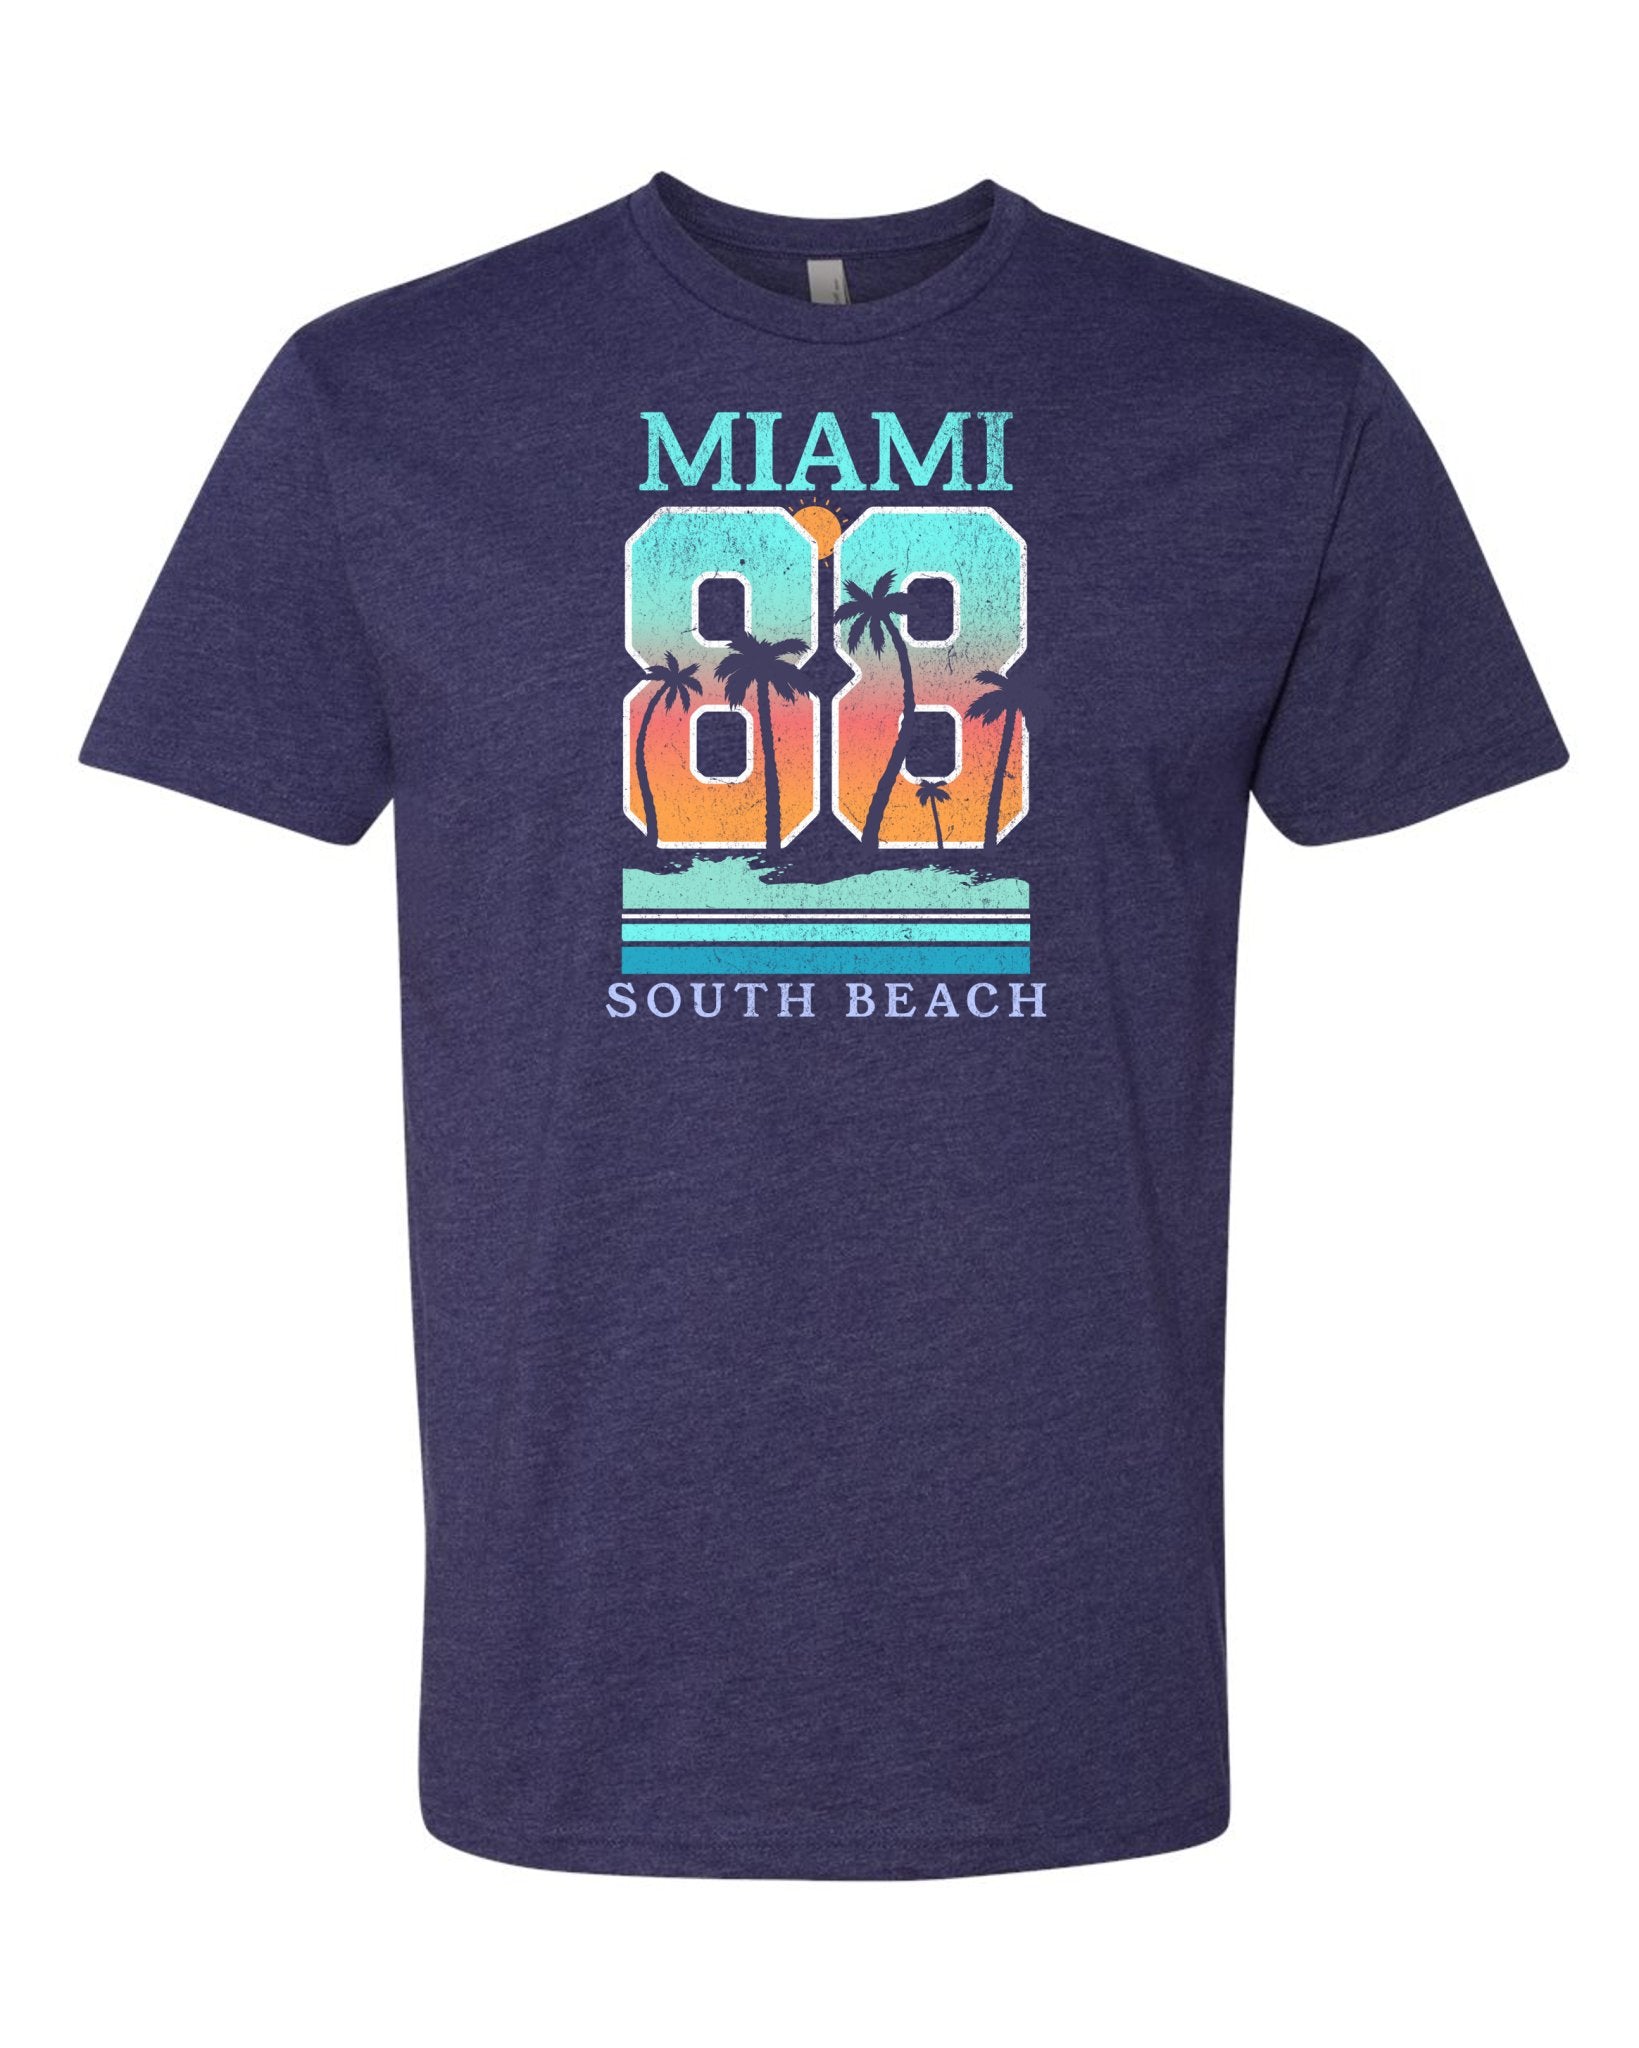 Miami 88 South Beach Retro Vibes T-Shirt: Embrace the Sun-kissed Style! -